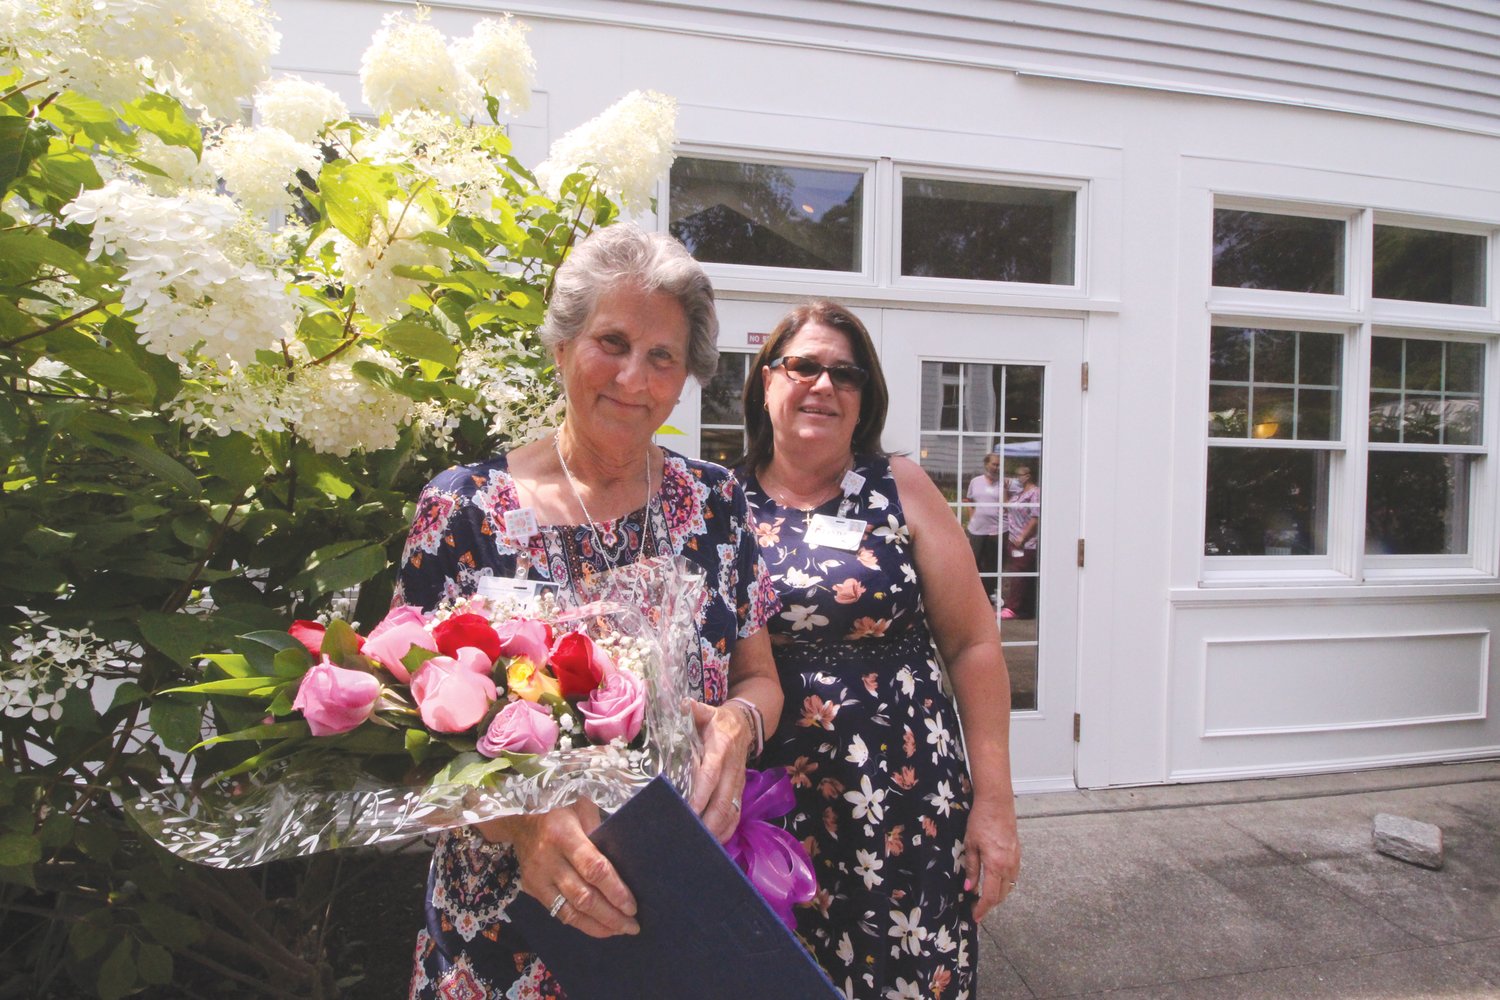 A ROSE FOR EVERY YEAR: Linda Sinnott, program director, presented Kim Morris with a bouquet of roses – one rose for every year – Monday at Cornerstone Adult Day Care Services, where Morris has worked for the past 35 years.